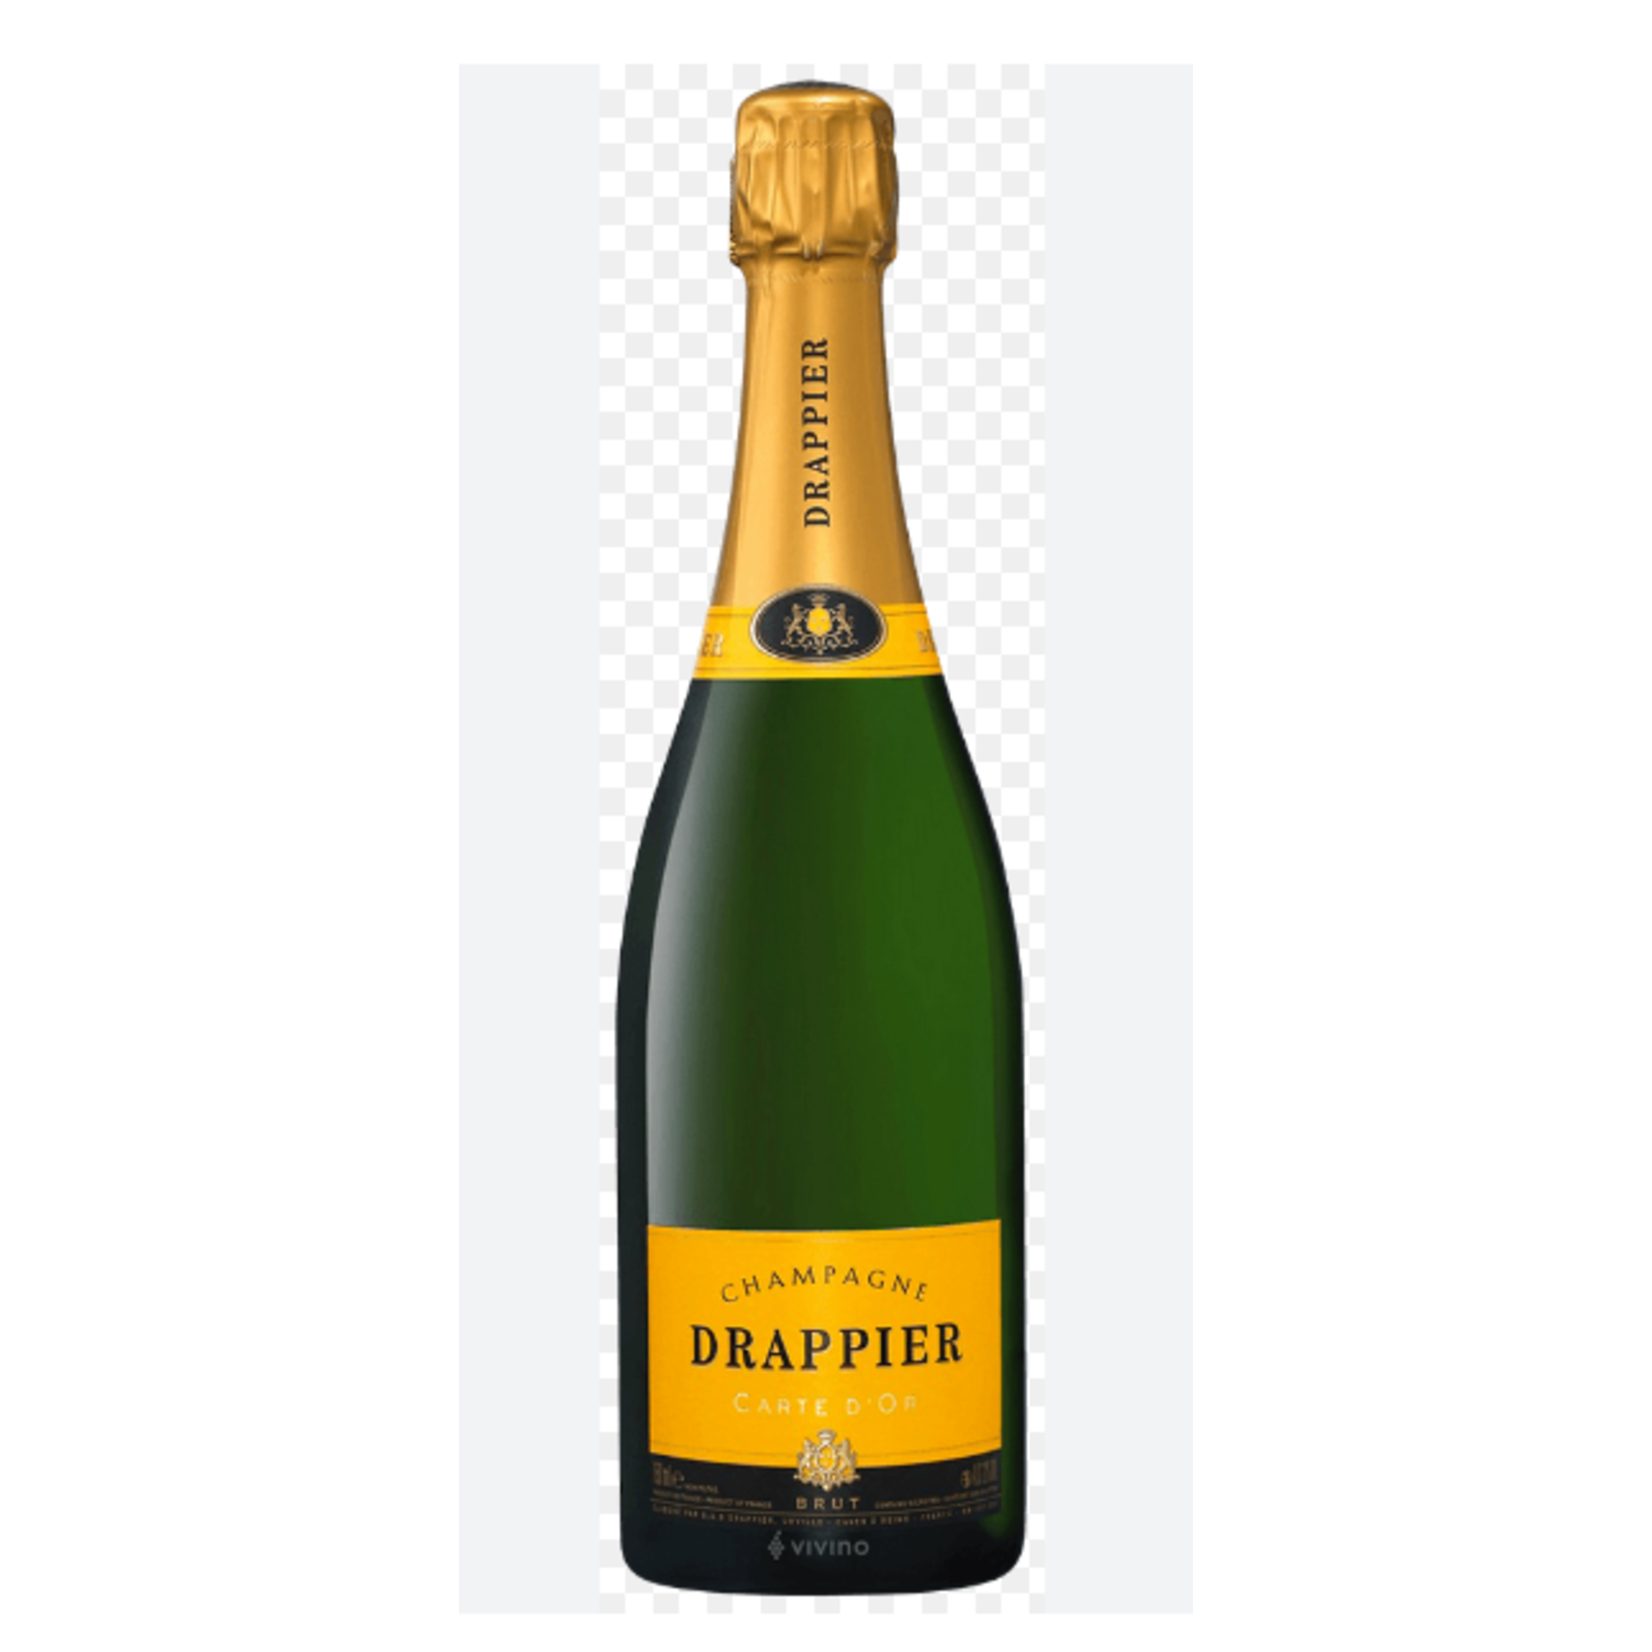 Drappier Drappier Carte D' Or Brut Champagne Champagne, France 90pts-WS